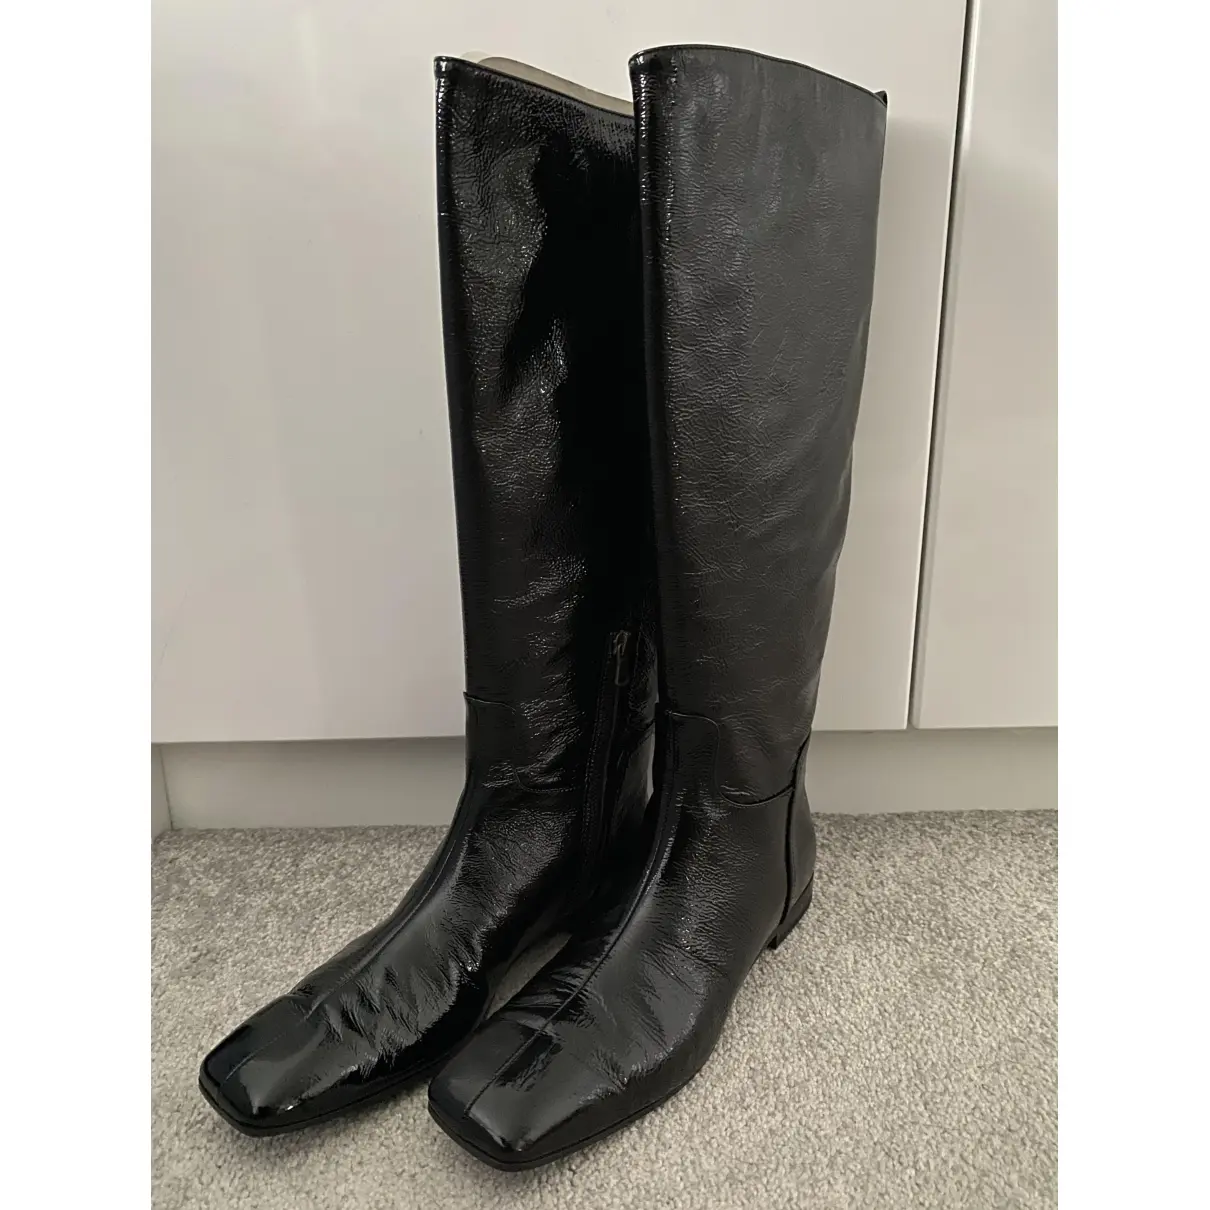 Buy Tomas Maier Patent leather riding boots online